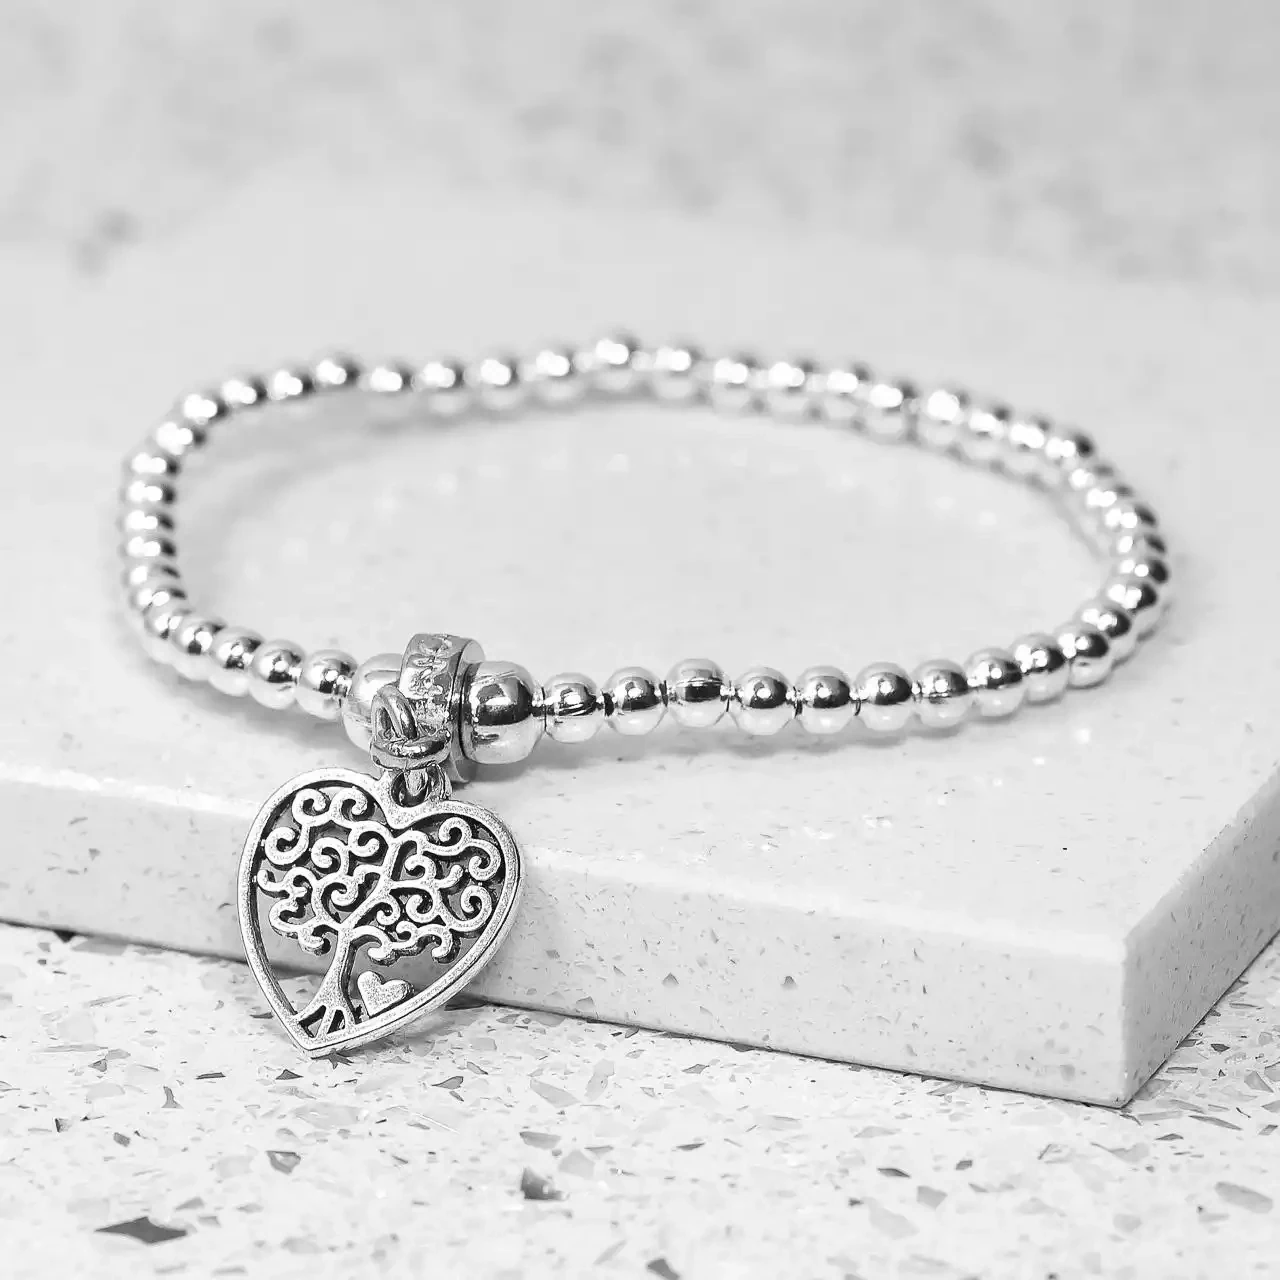 Seed Bead Bracelet With Pewter Heart Tree of Life Charm by Metal Planet